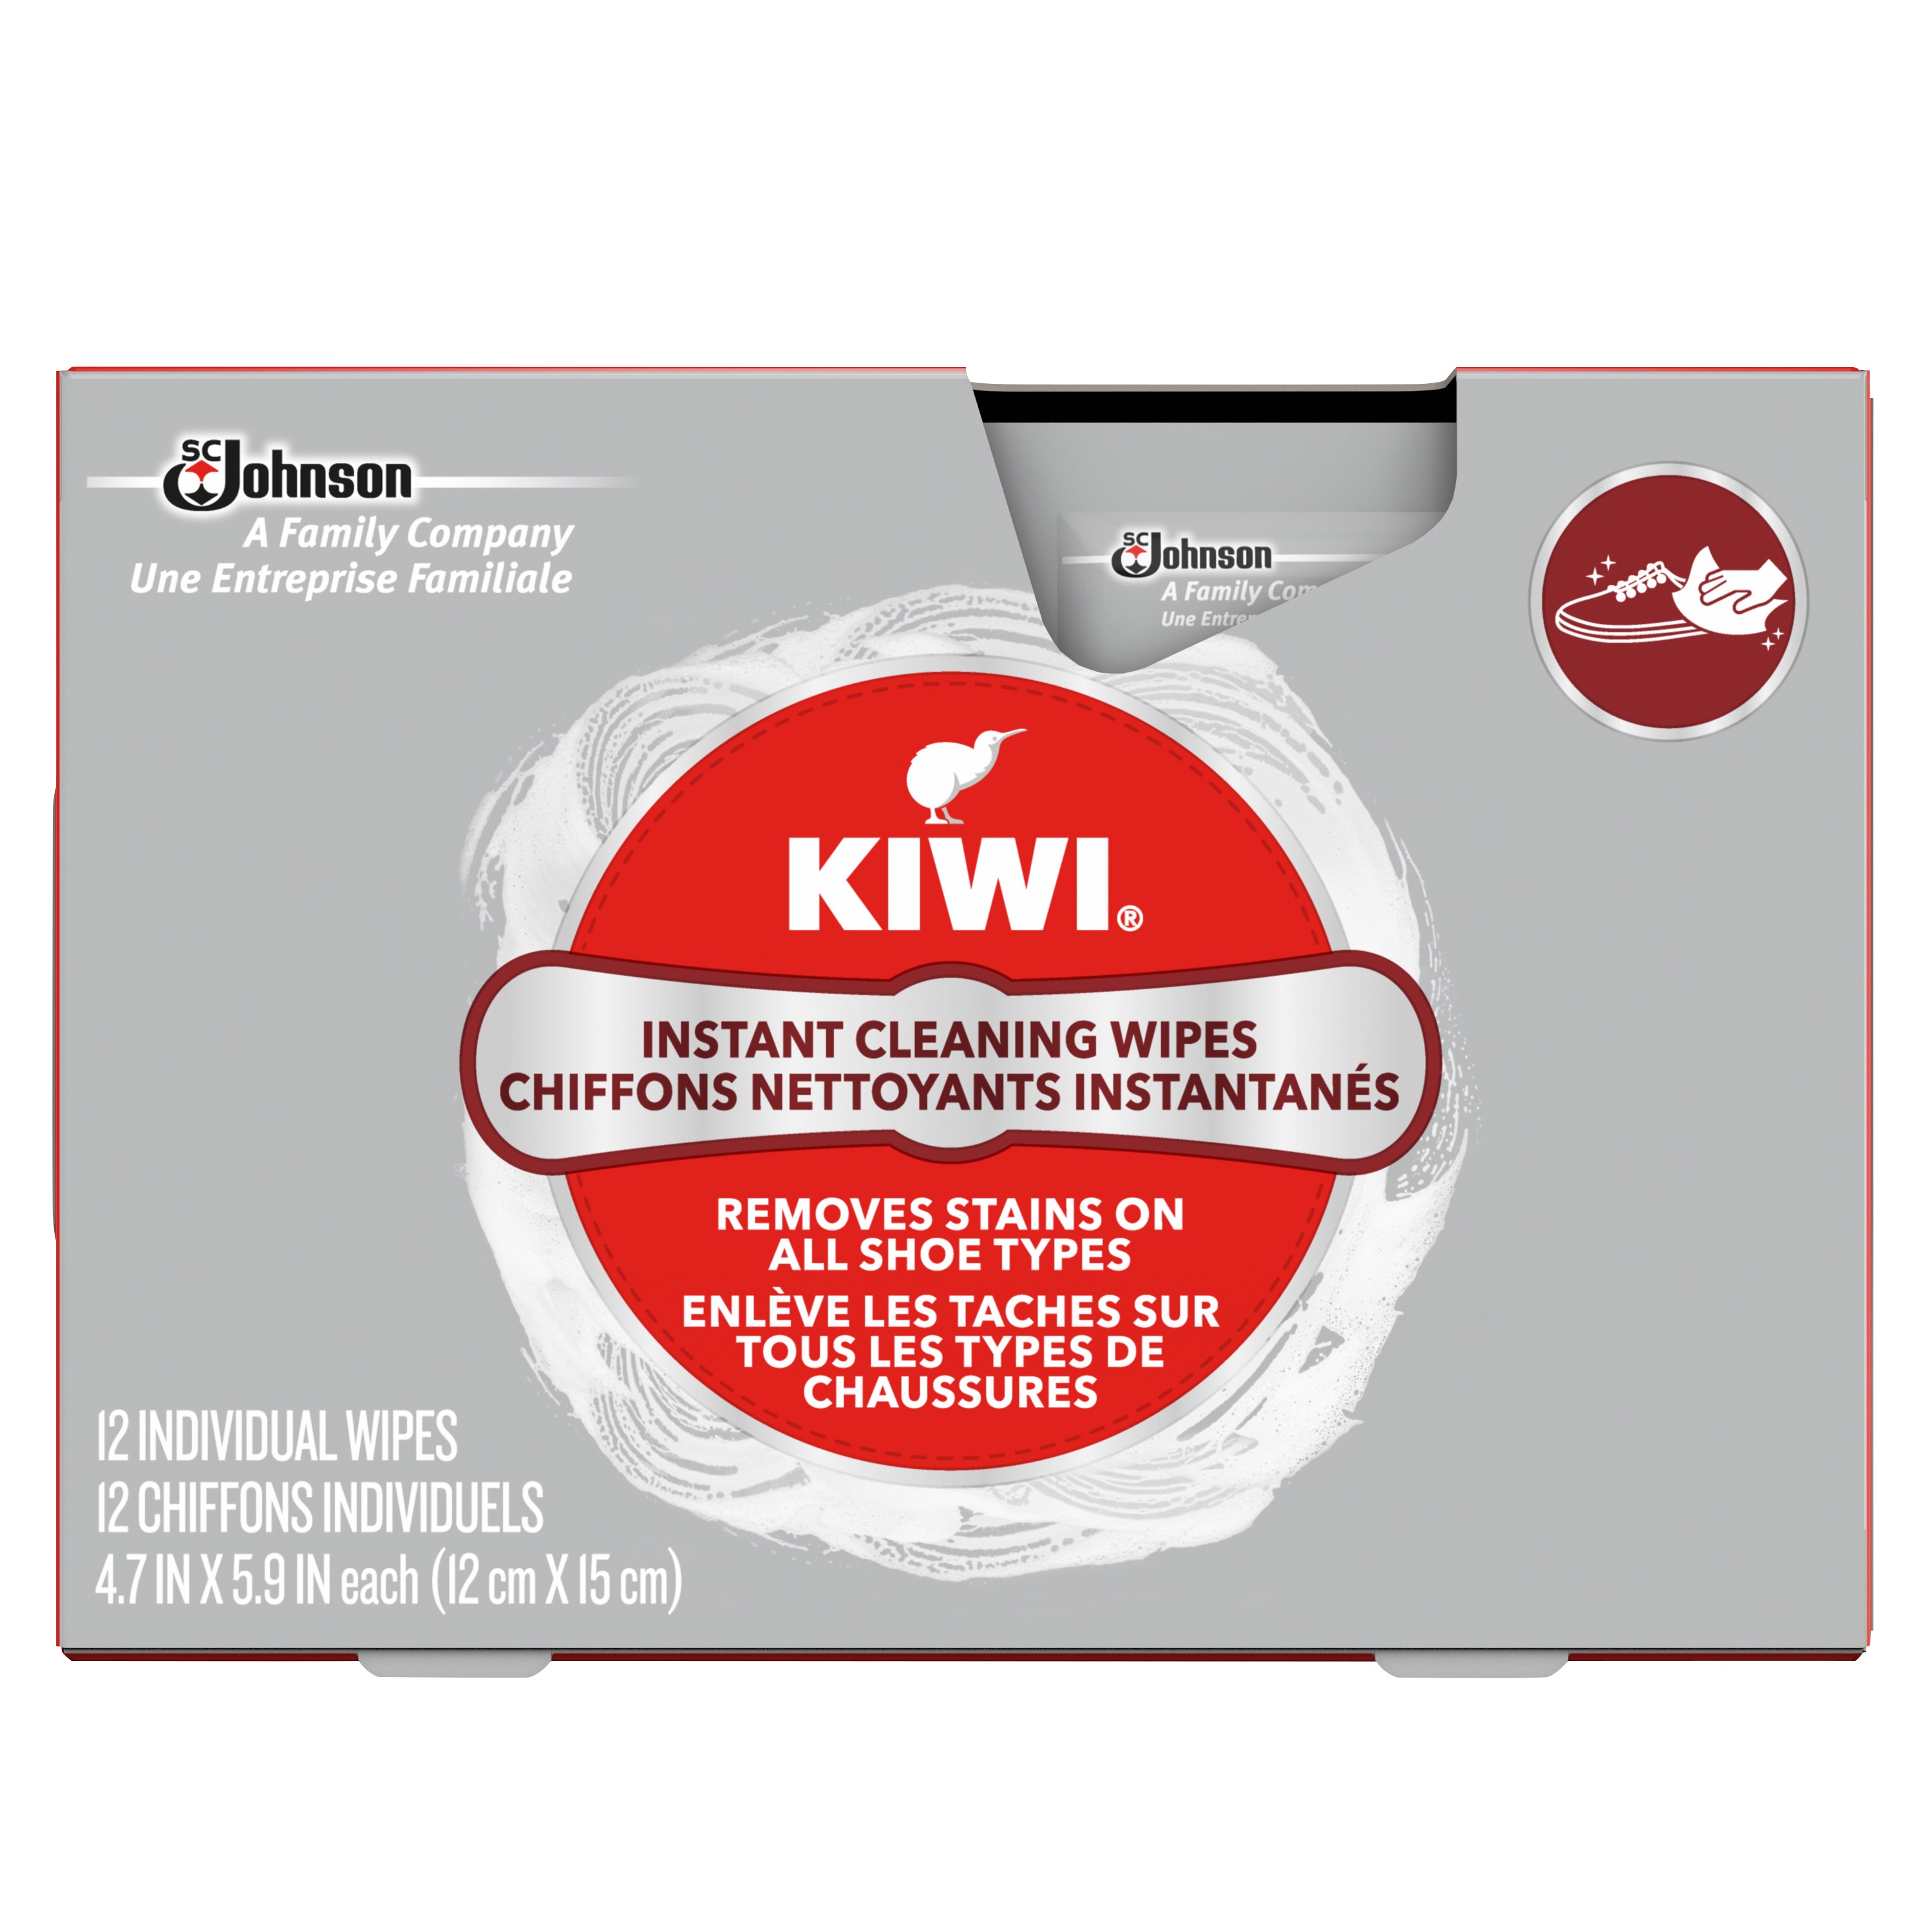 KIWI® Instant Cleaning Wipes